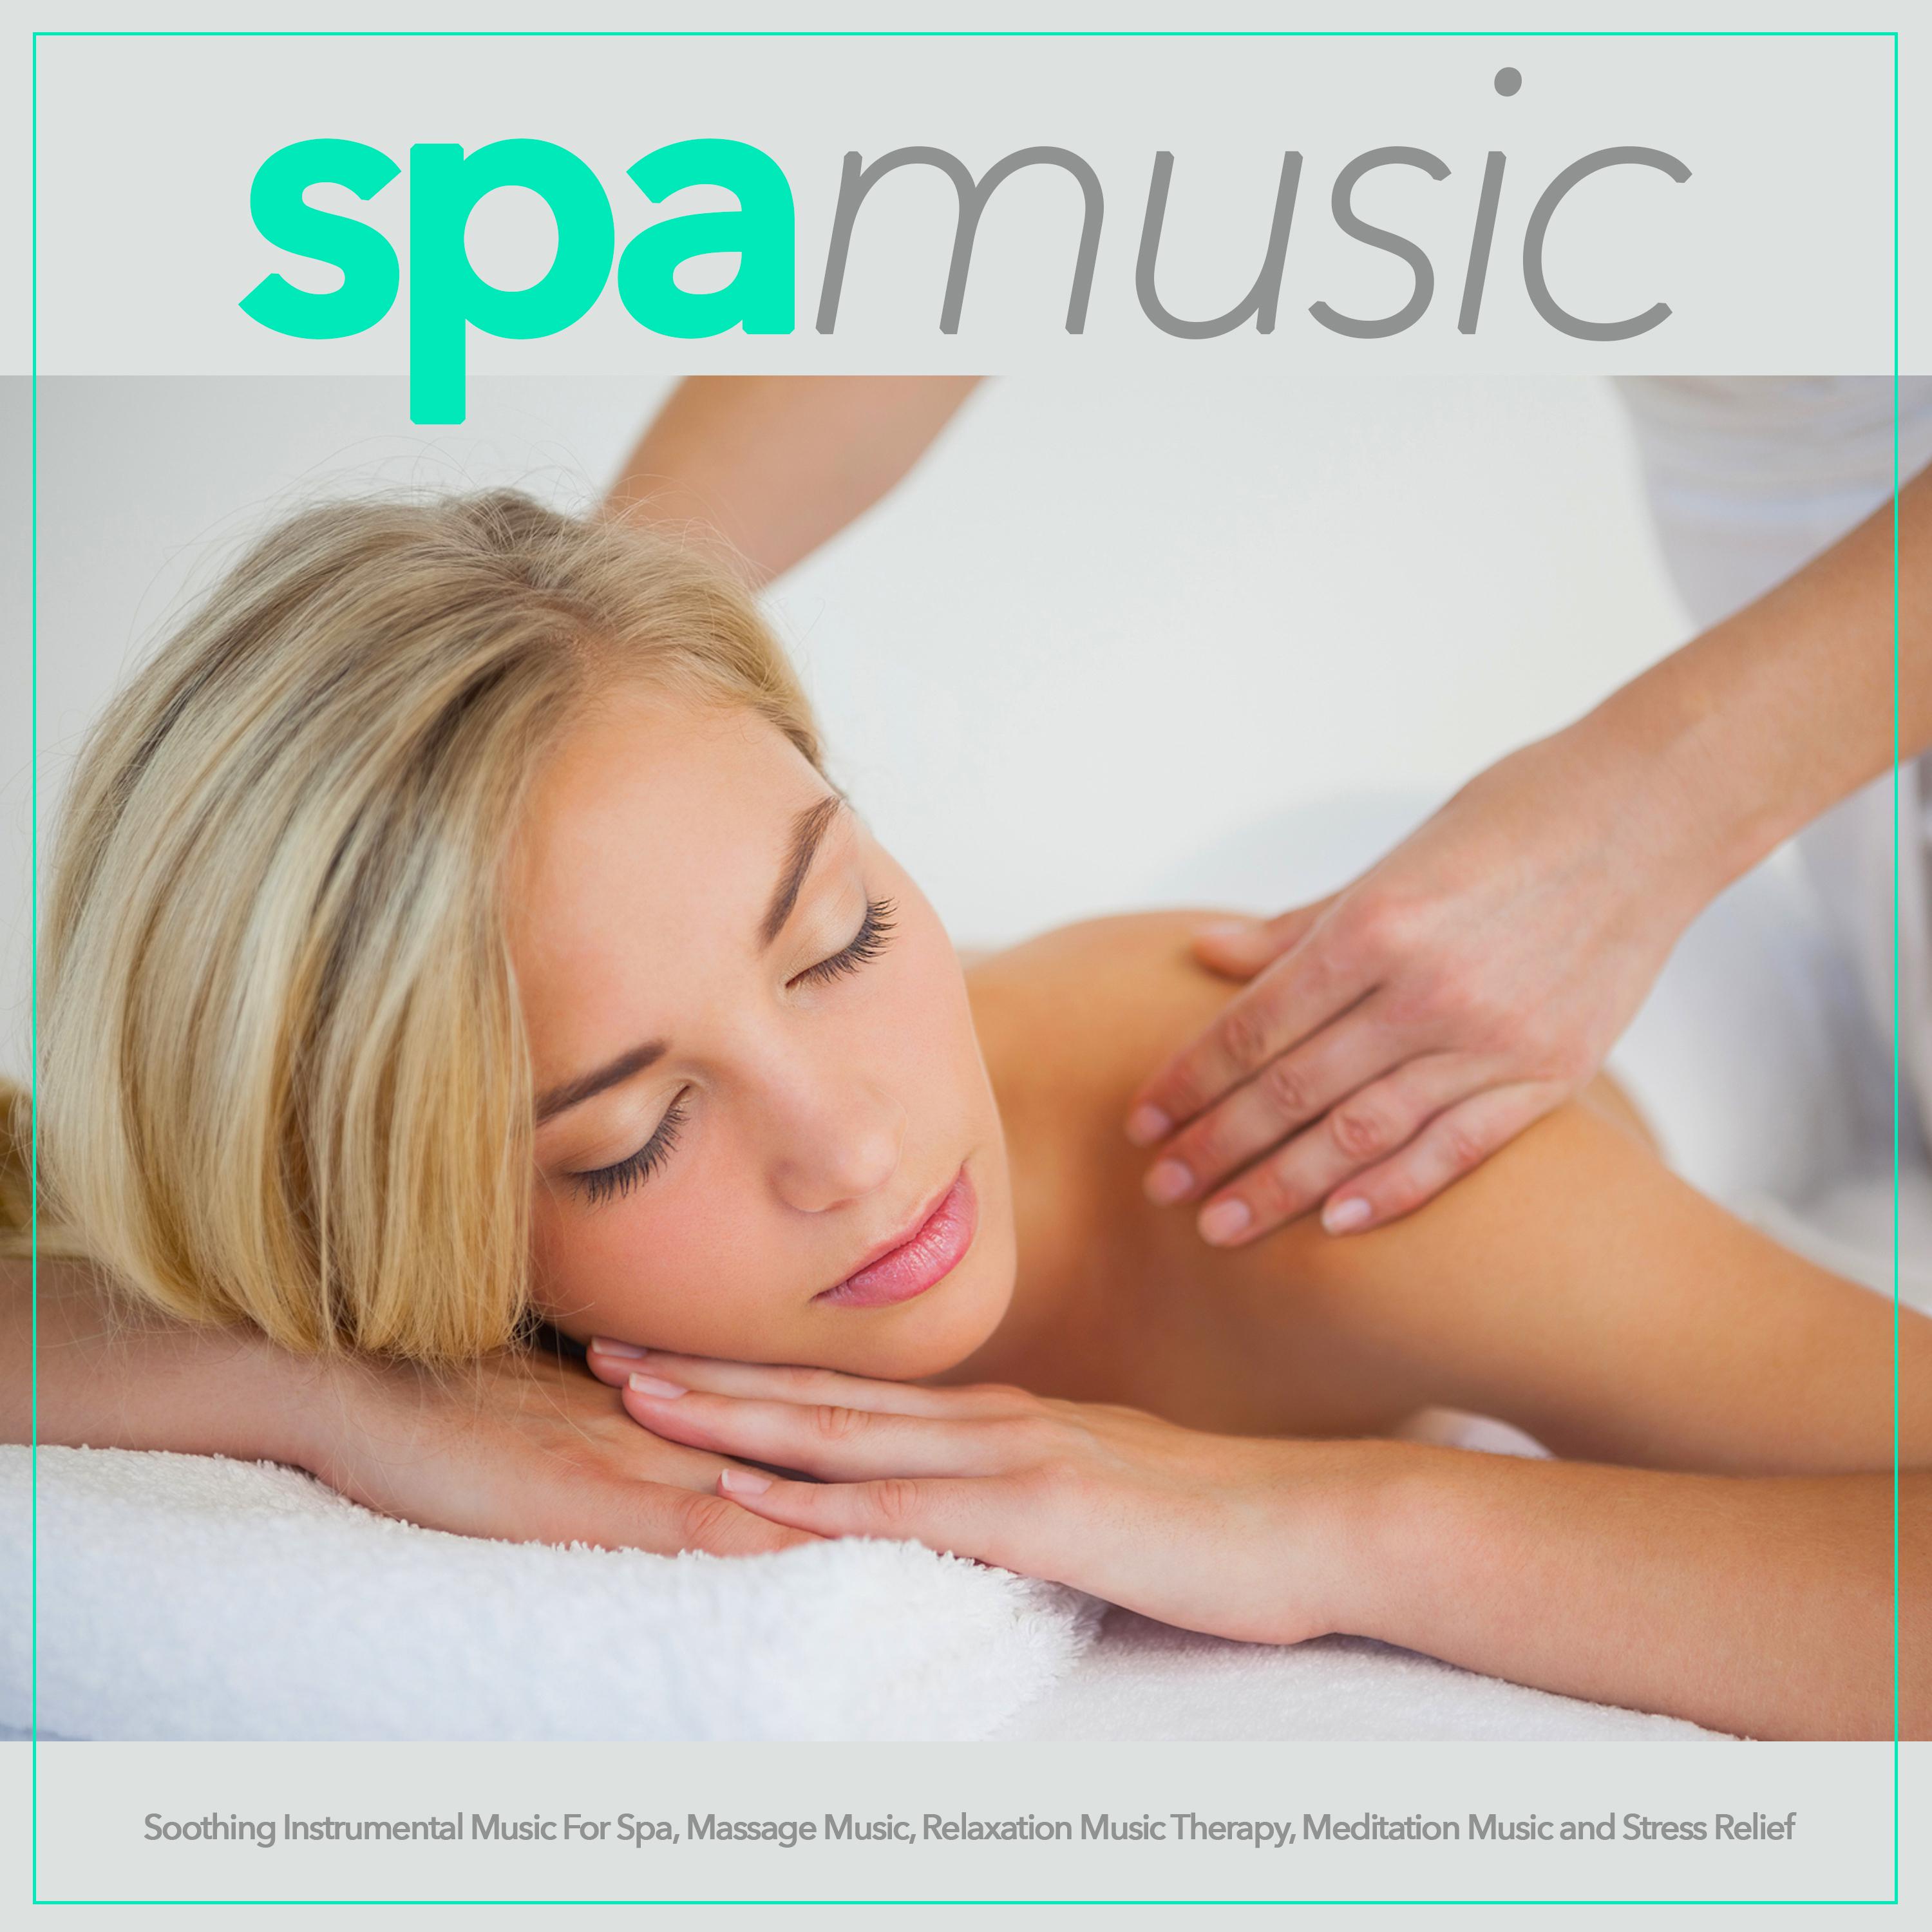 Spa Music: Soothing Instrumental Music For Spa, Massage Music, Relaxation Music Therapy, Meditation Music and Stress Relief